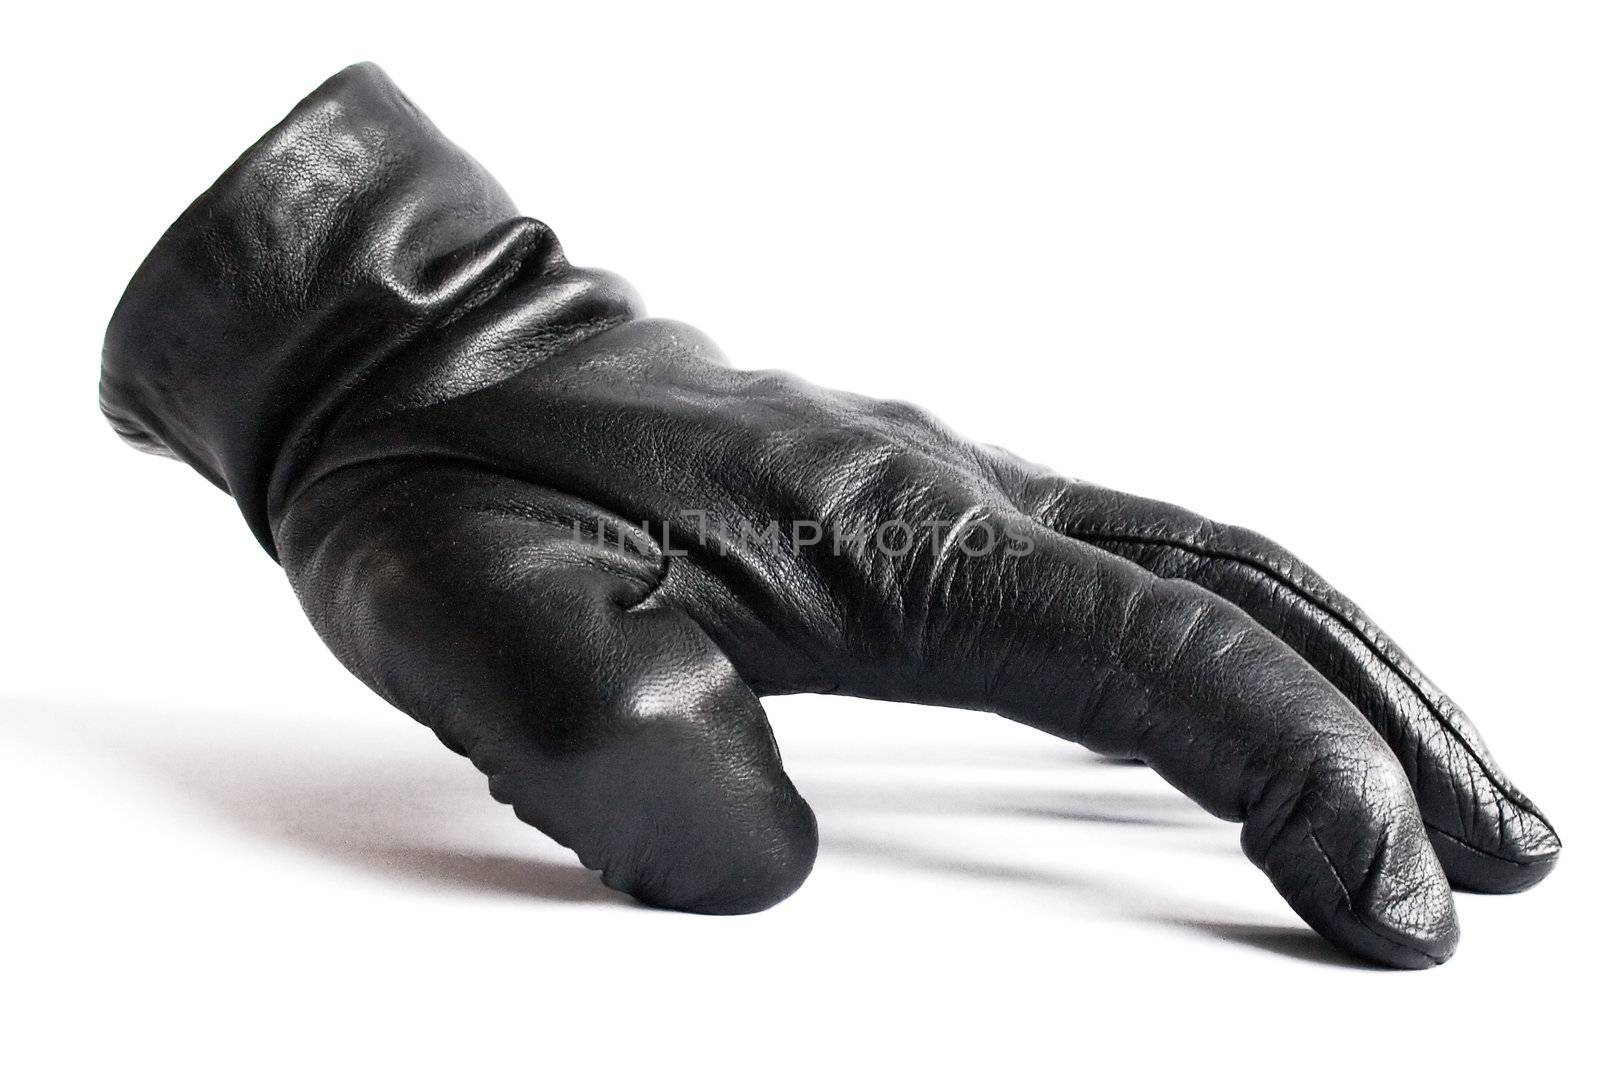 Spooky black leather glove isolated on a white background.